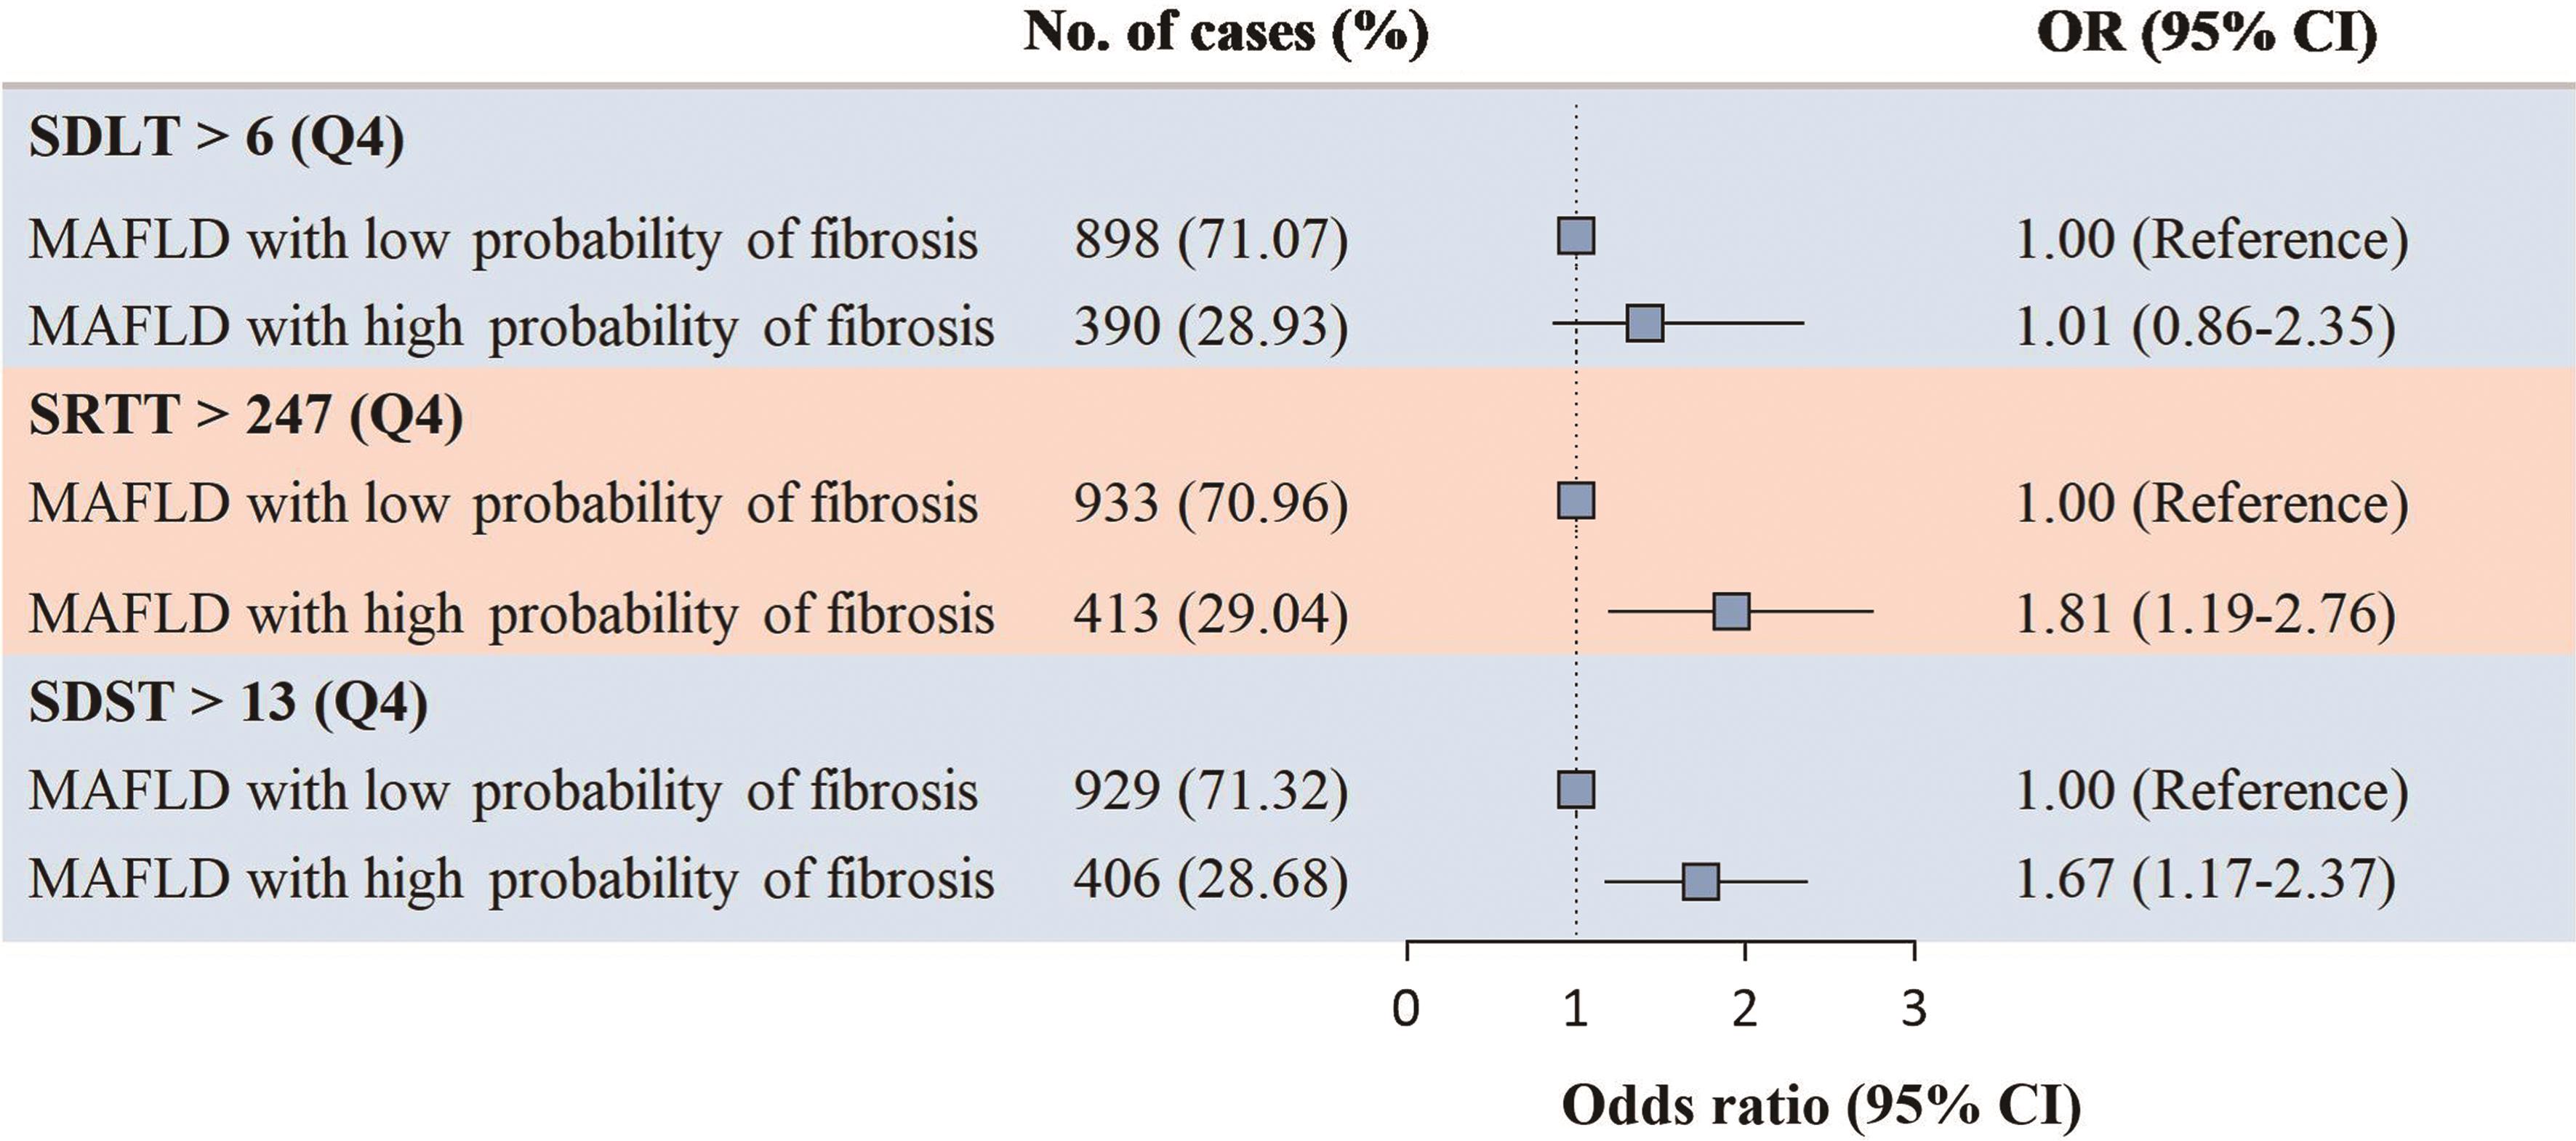 Risk of cognitive impairment by probability of fibrosis in participants with MAFLD.